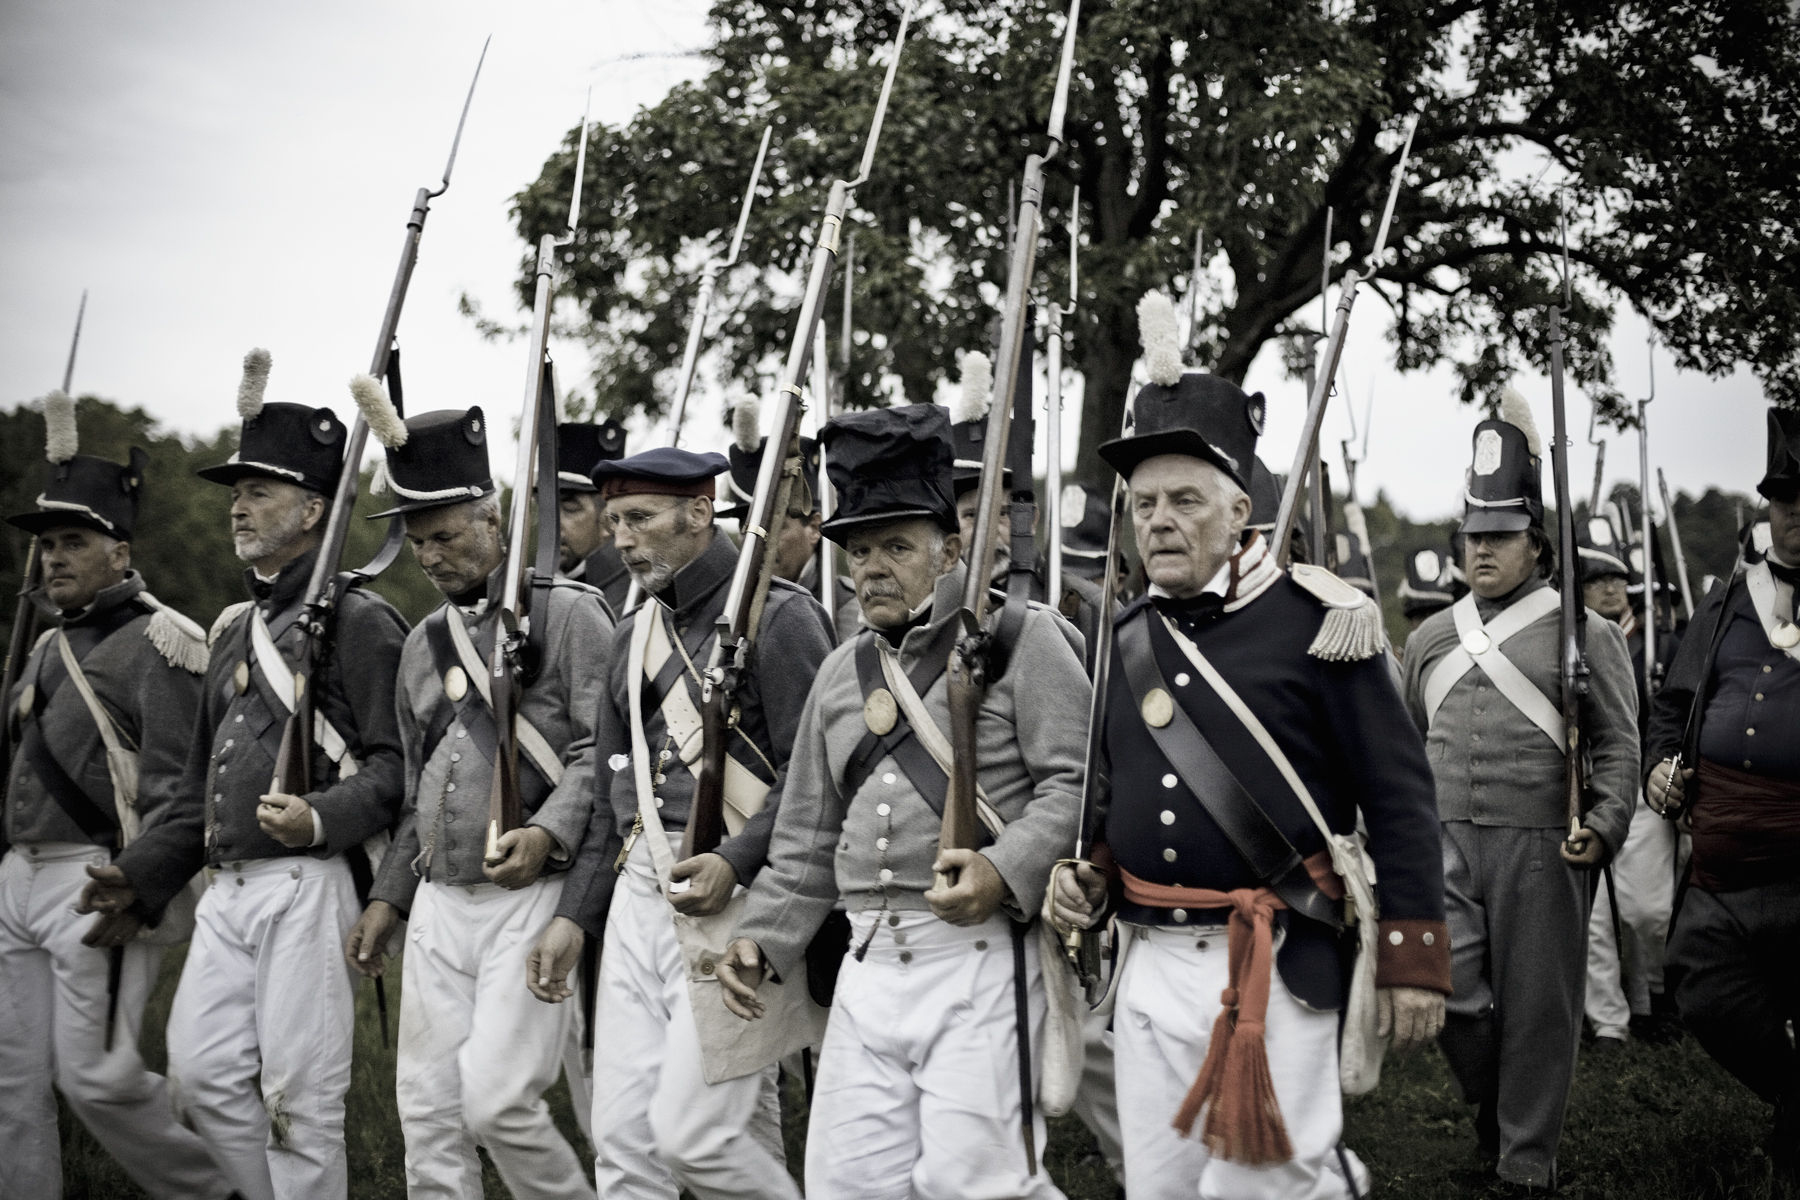 Canada,Ontario,Fort Erie,Old Fort Erie, War of 1812 re-enactment of the Battle of Stoney Creek.The 22nd US Infantry